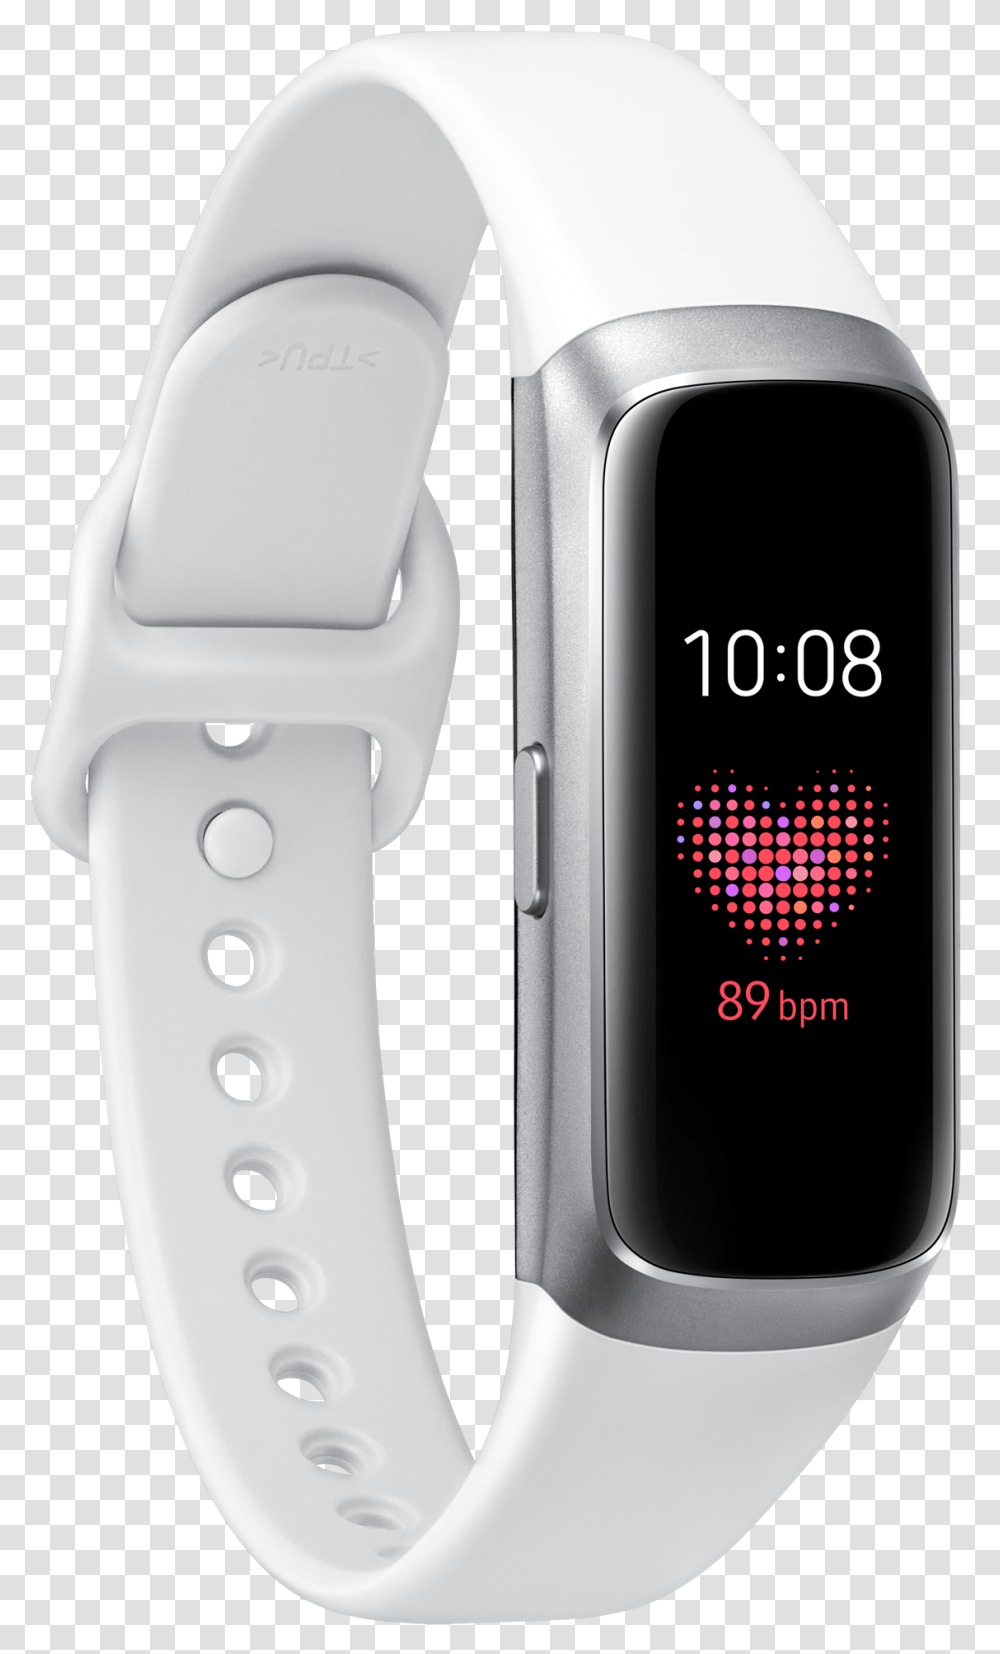 Galaxy Fit Samsung Support Uk Samsung Galaxy Fit Silver, Wristwatch, Electronics, Phone, Digital Watch Transparent Png